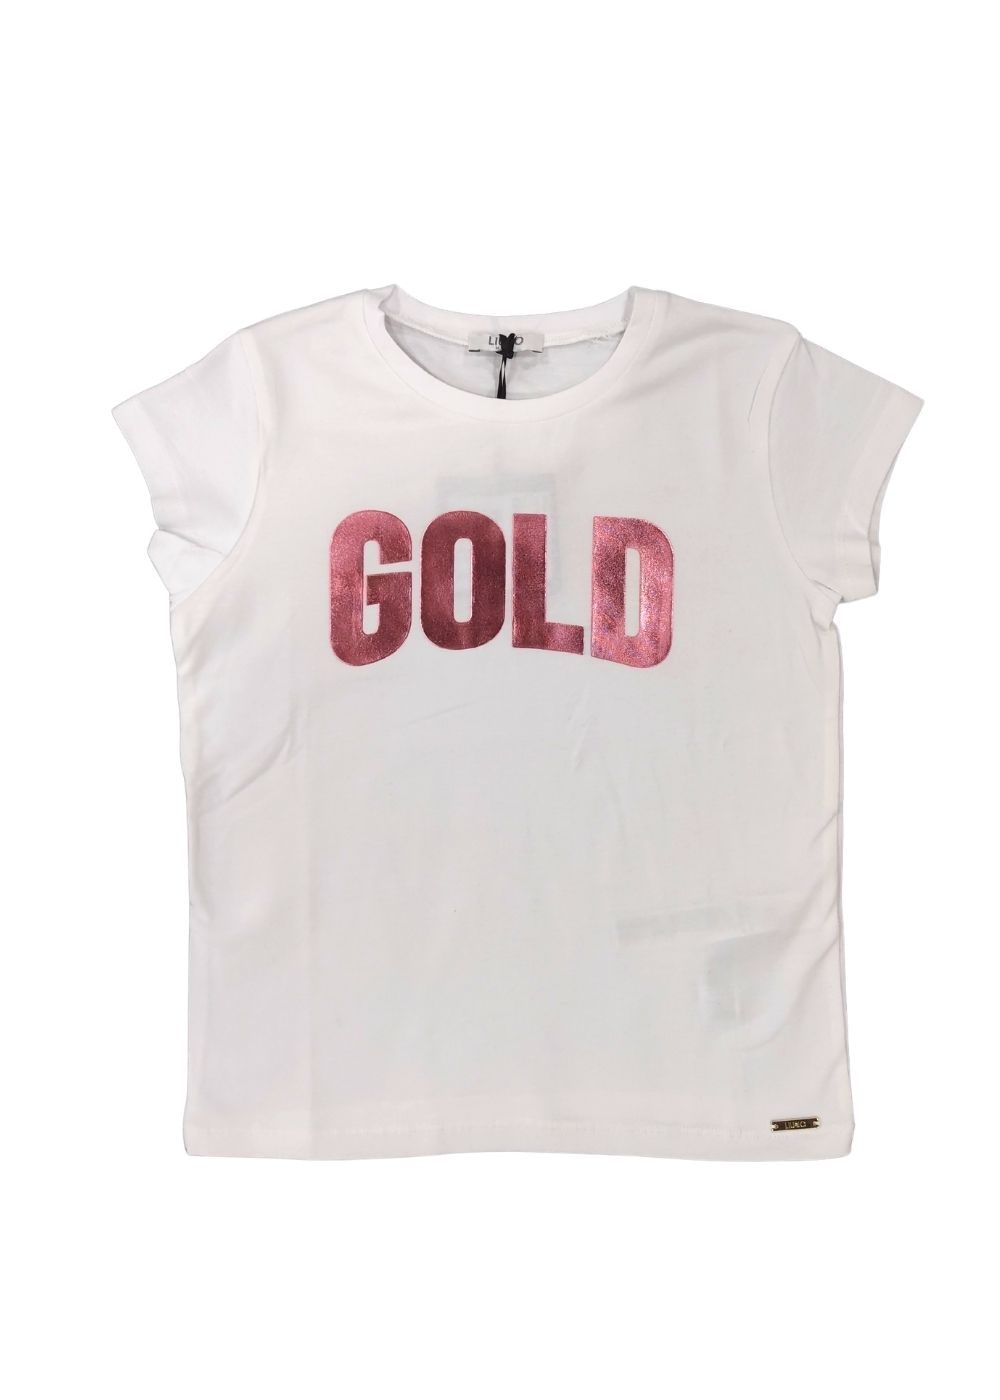 Featured image for “Liu Jo T-shirt Gold”